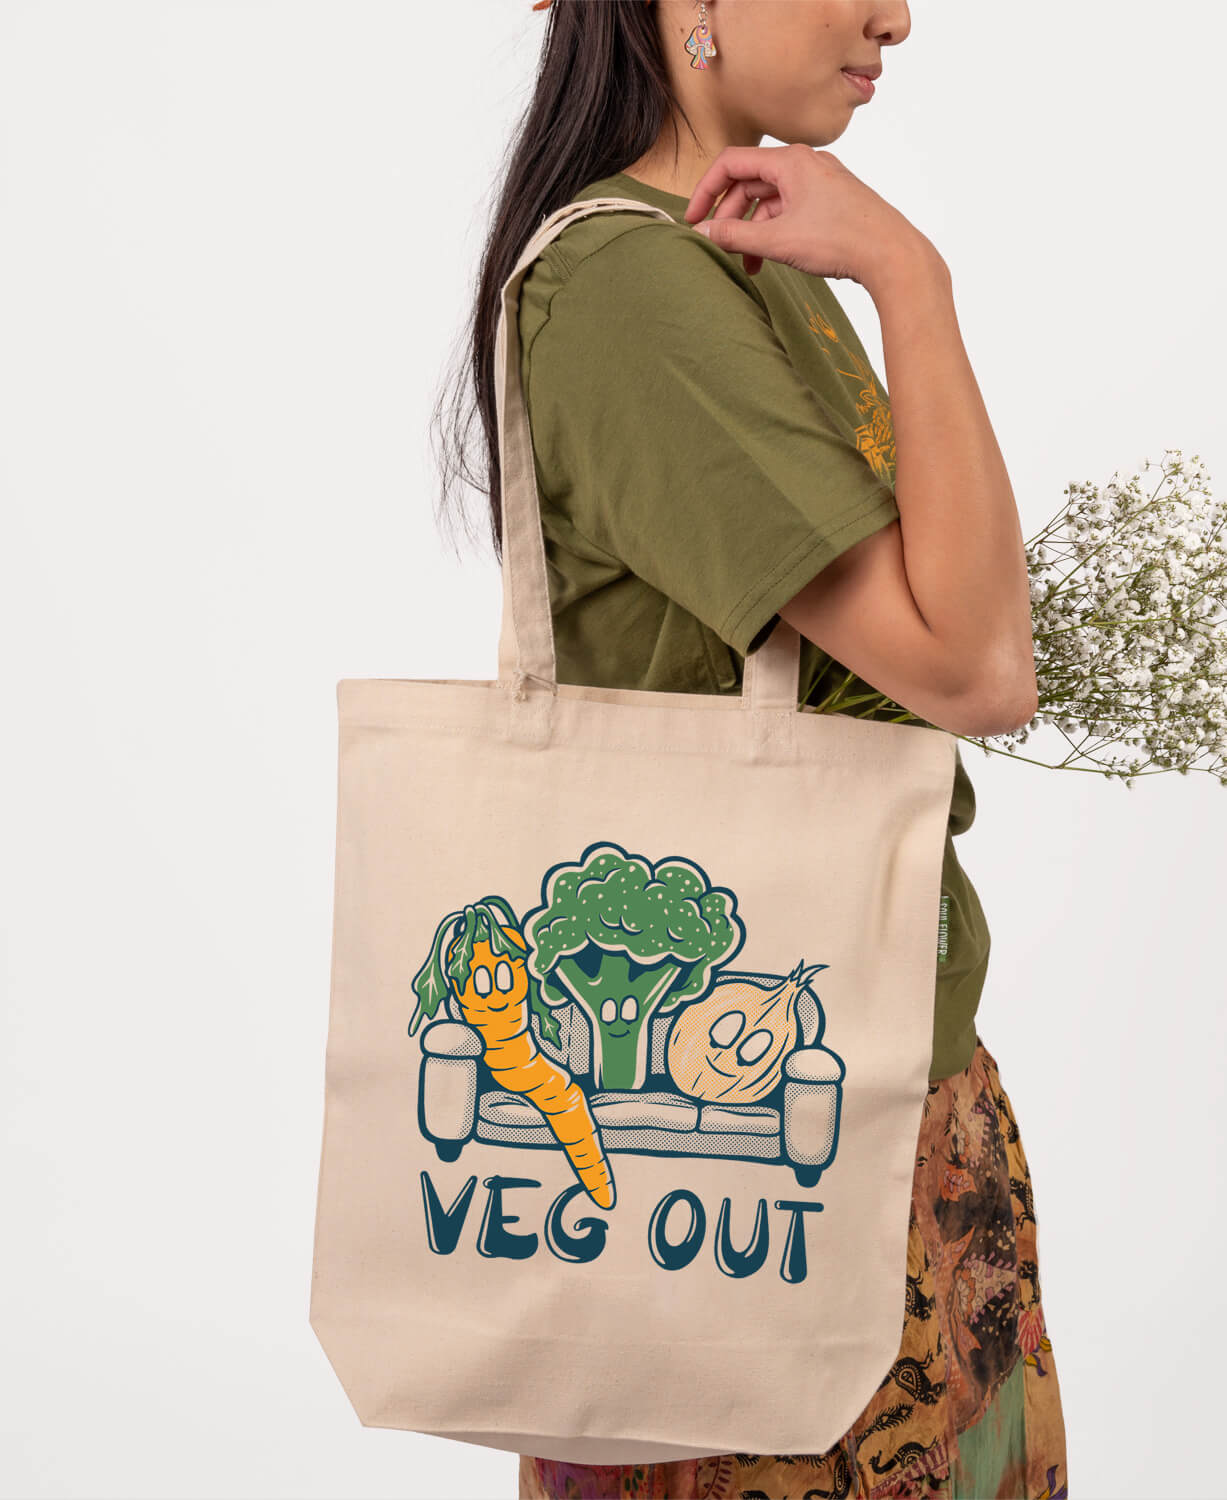 NEW! Veg Out Eco Tote Bag